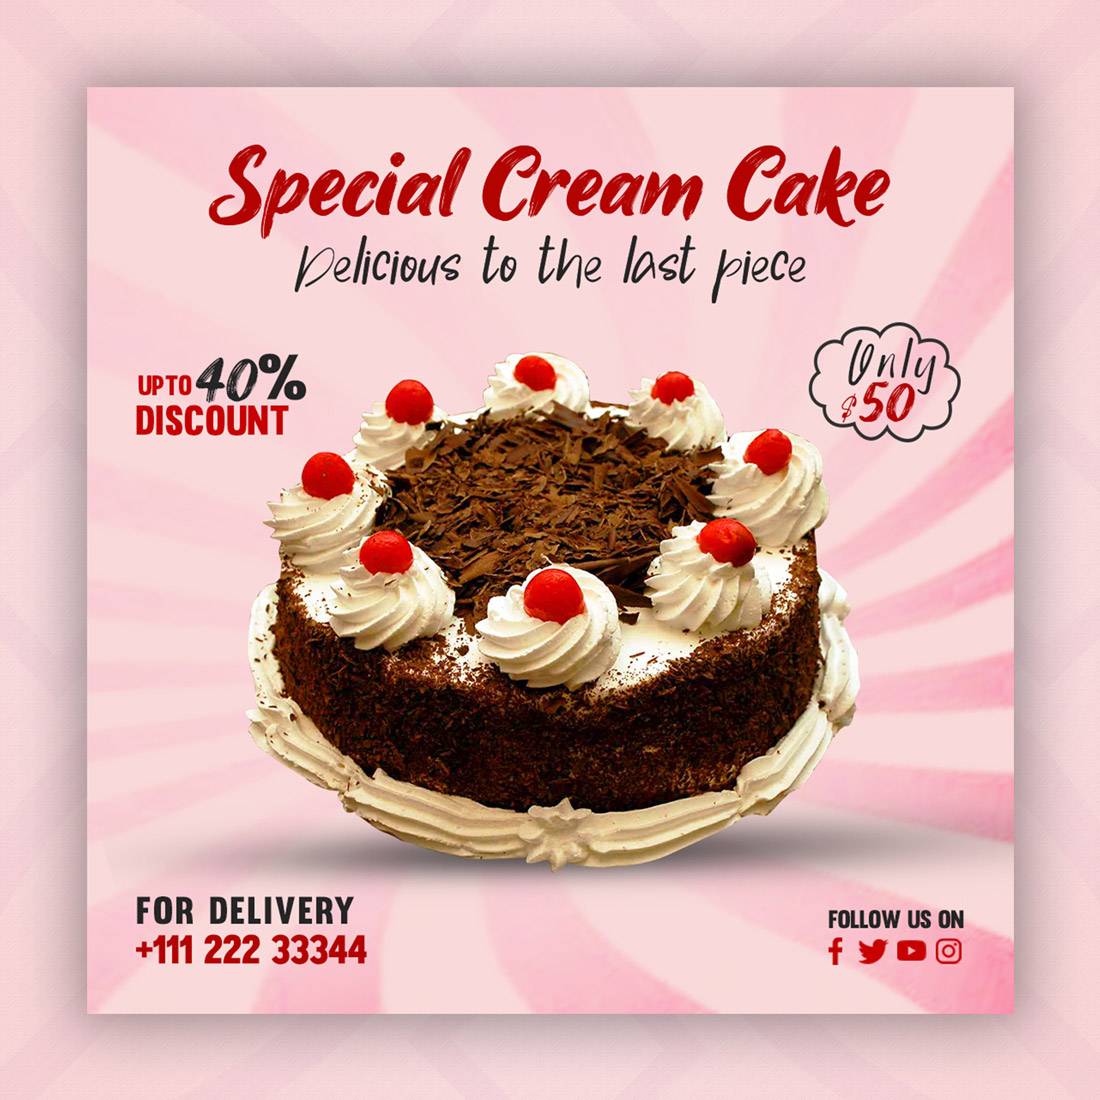 Poster advertising a special cream cake.